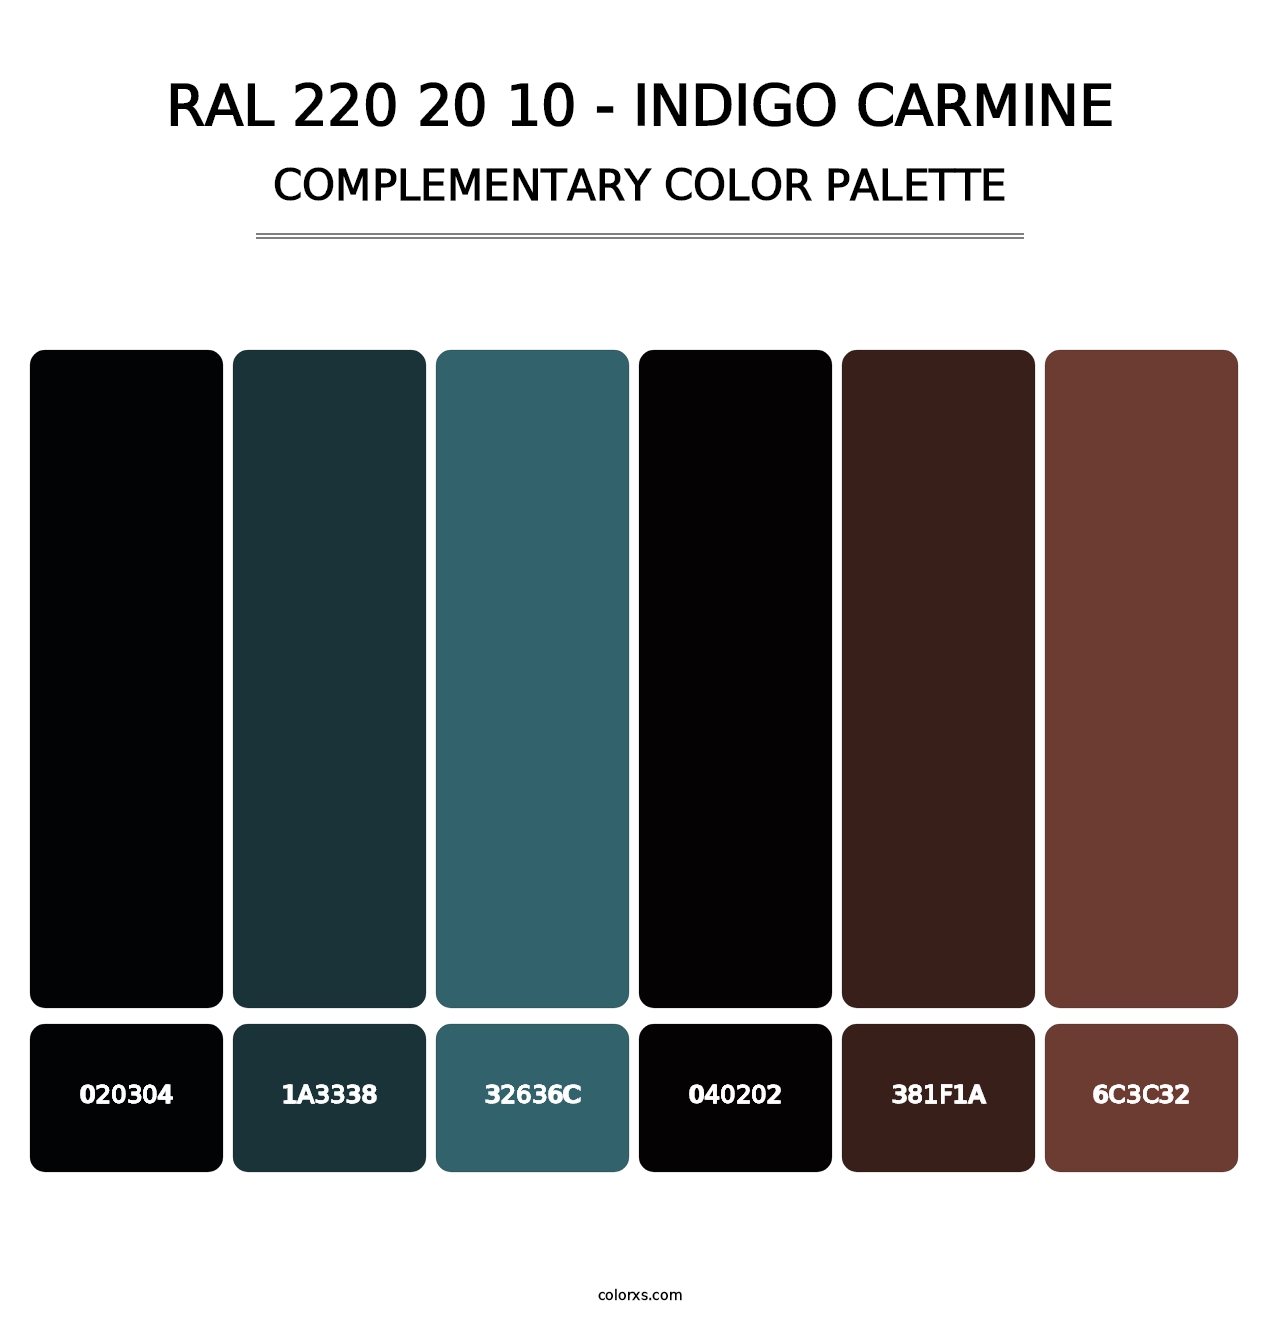 RAL 220 20 10 - Indigo Carmine - Complementary Color Palette